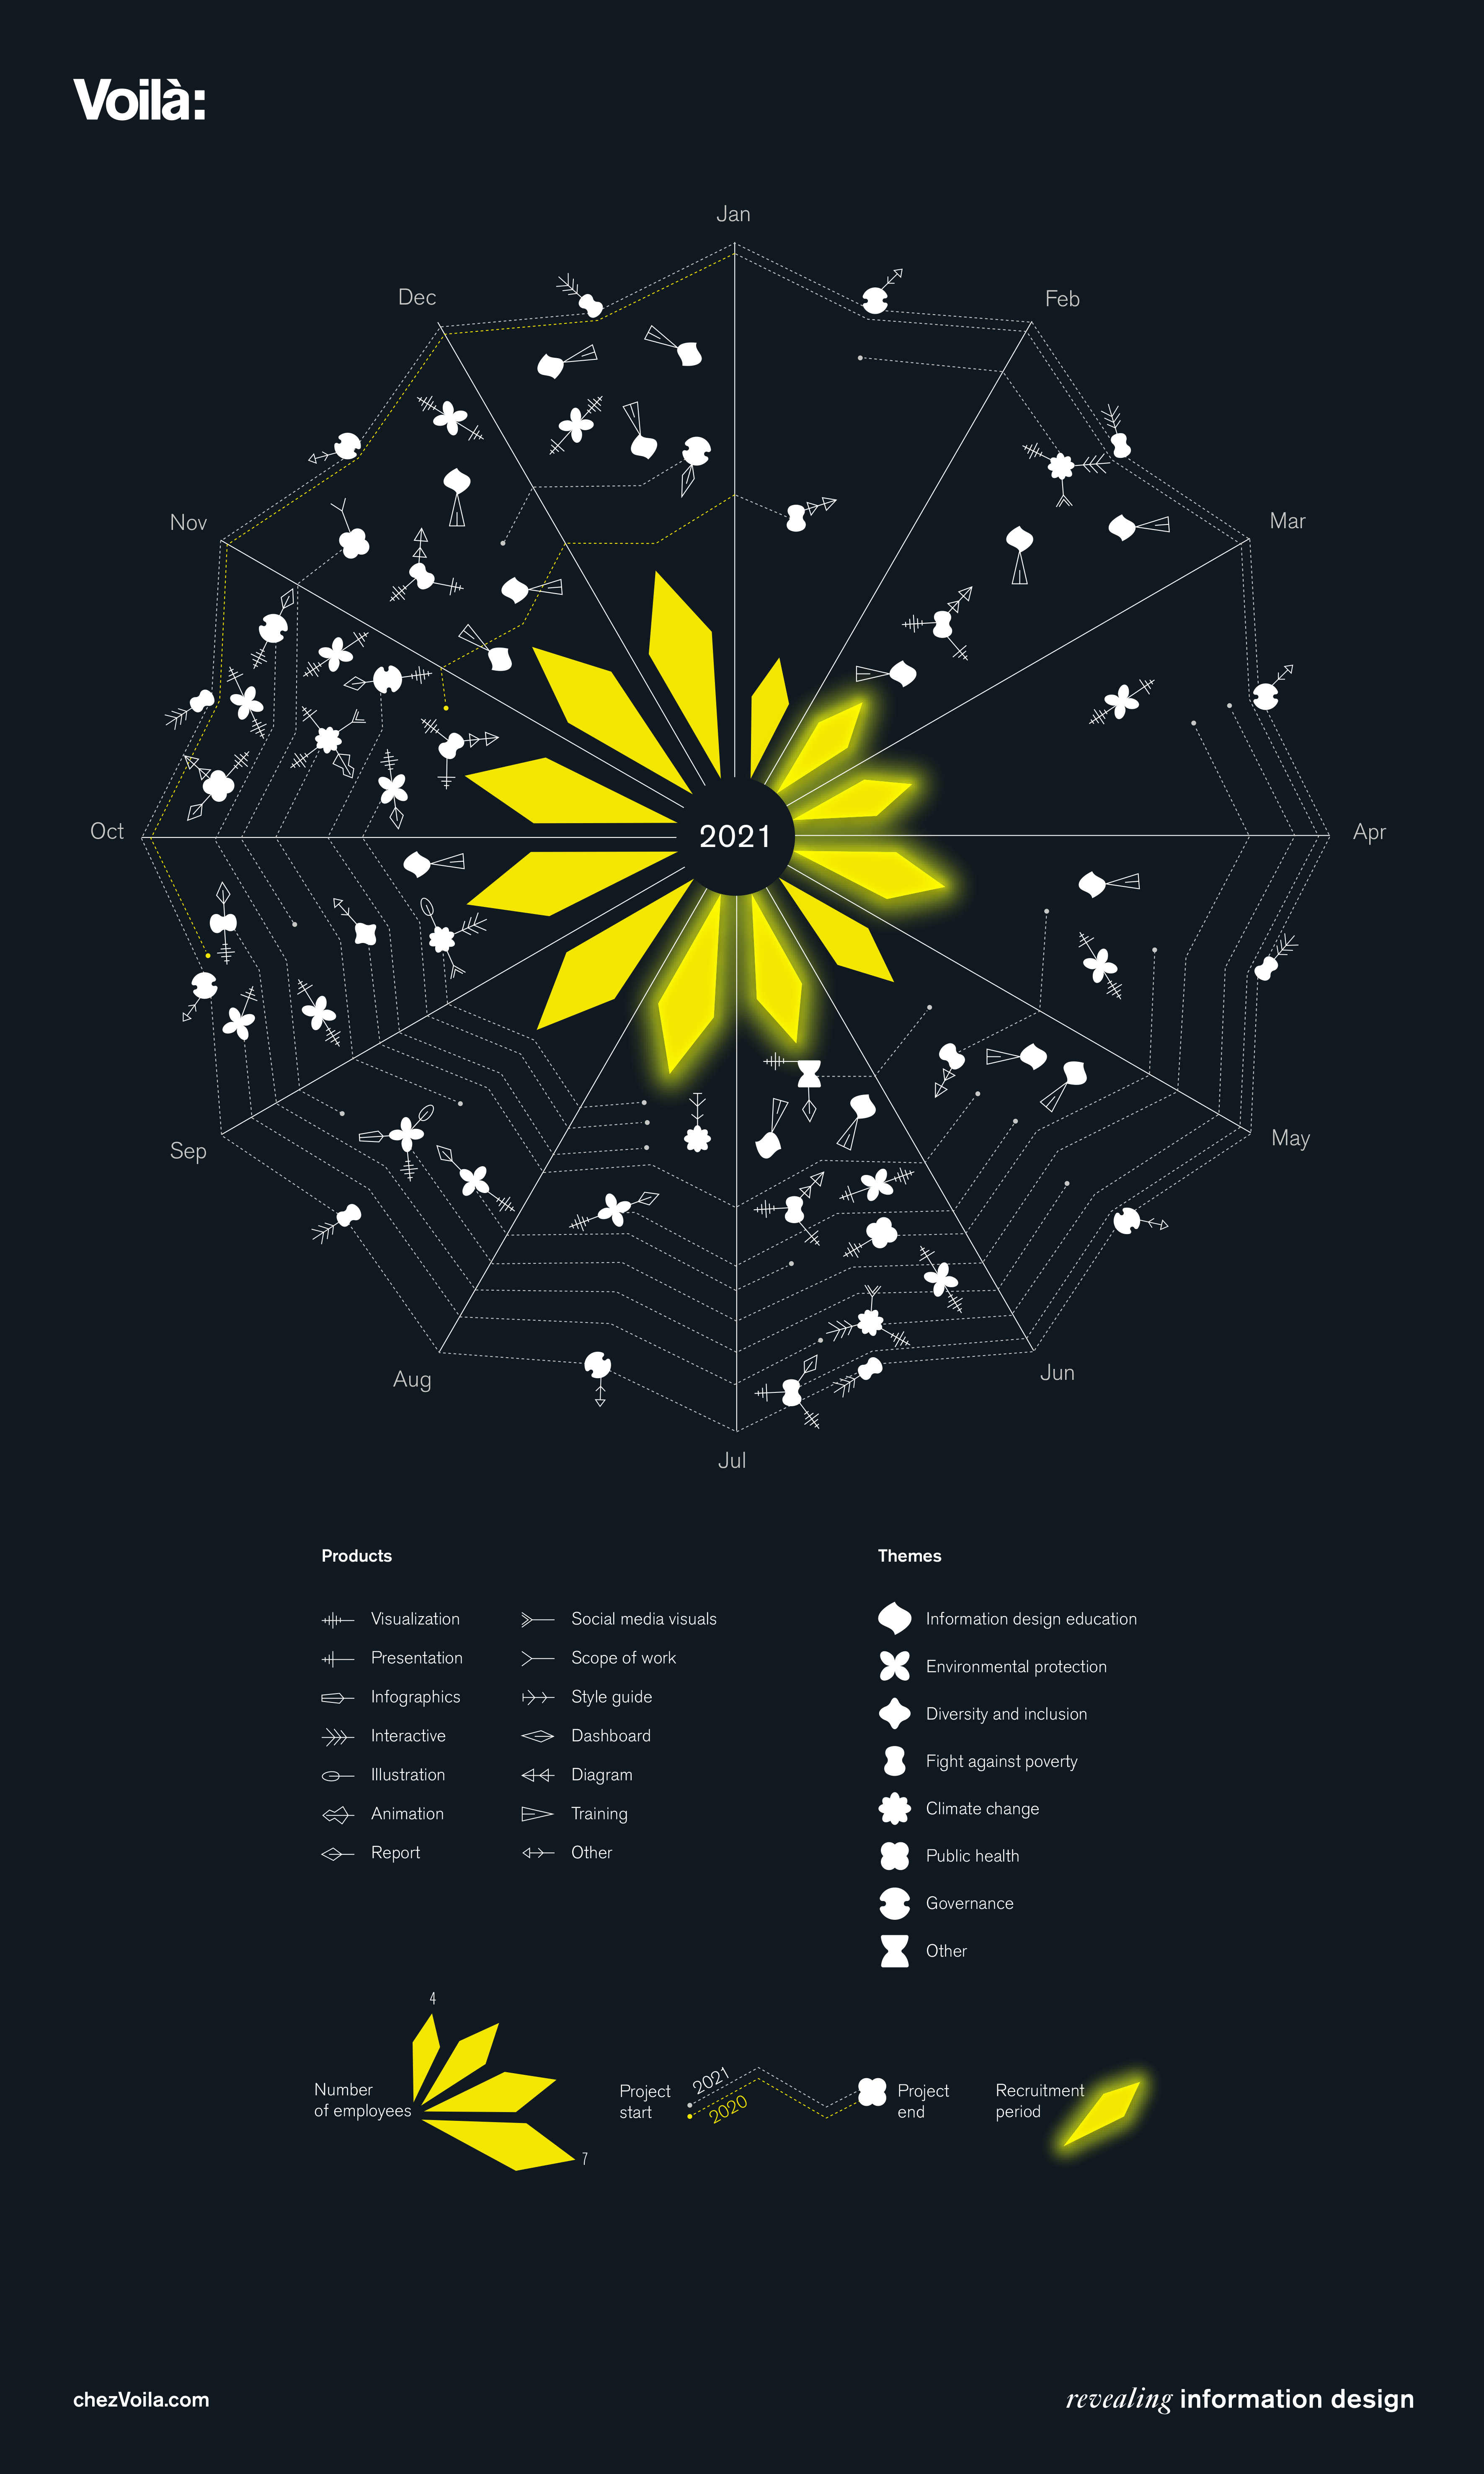 A visual overview of projects in 2021 at Voilà. On a black background, it is shaped like a snowflake or a spider web, with the twelve months going around like a clock. In the middle, there are yellow diamonds that represent the number of staff, going from 4 to 7. Around, there are various shapes that show the sectors of the projects (environment, social, governance). They have little arrows that represent the type of work: infographics, dashboard, interactive, etc.